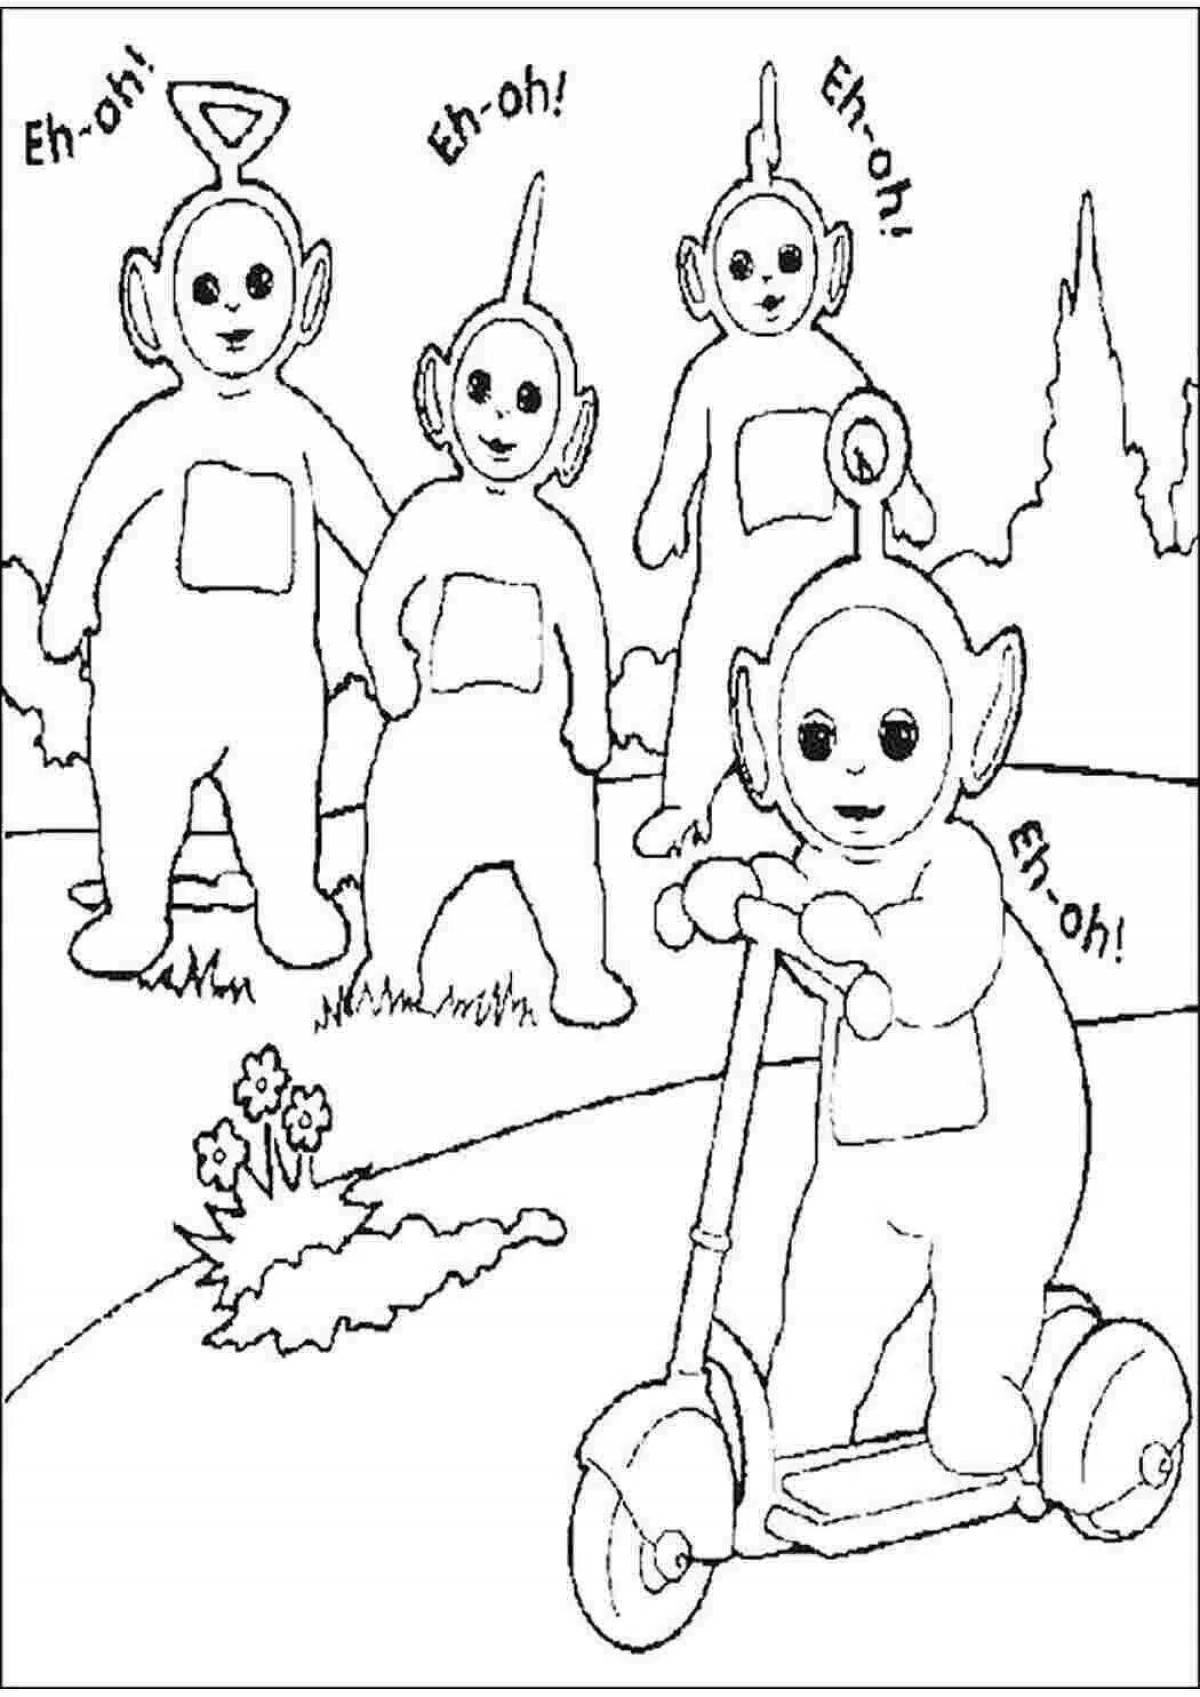 Slender-tubbies adorable coloring book